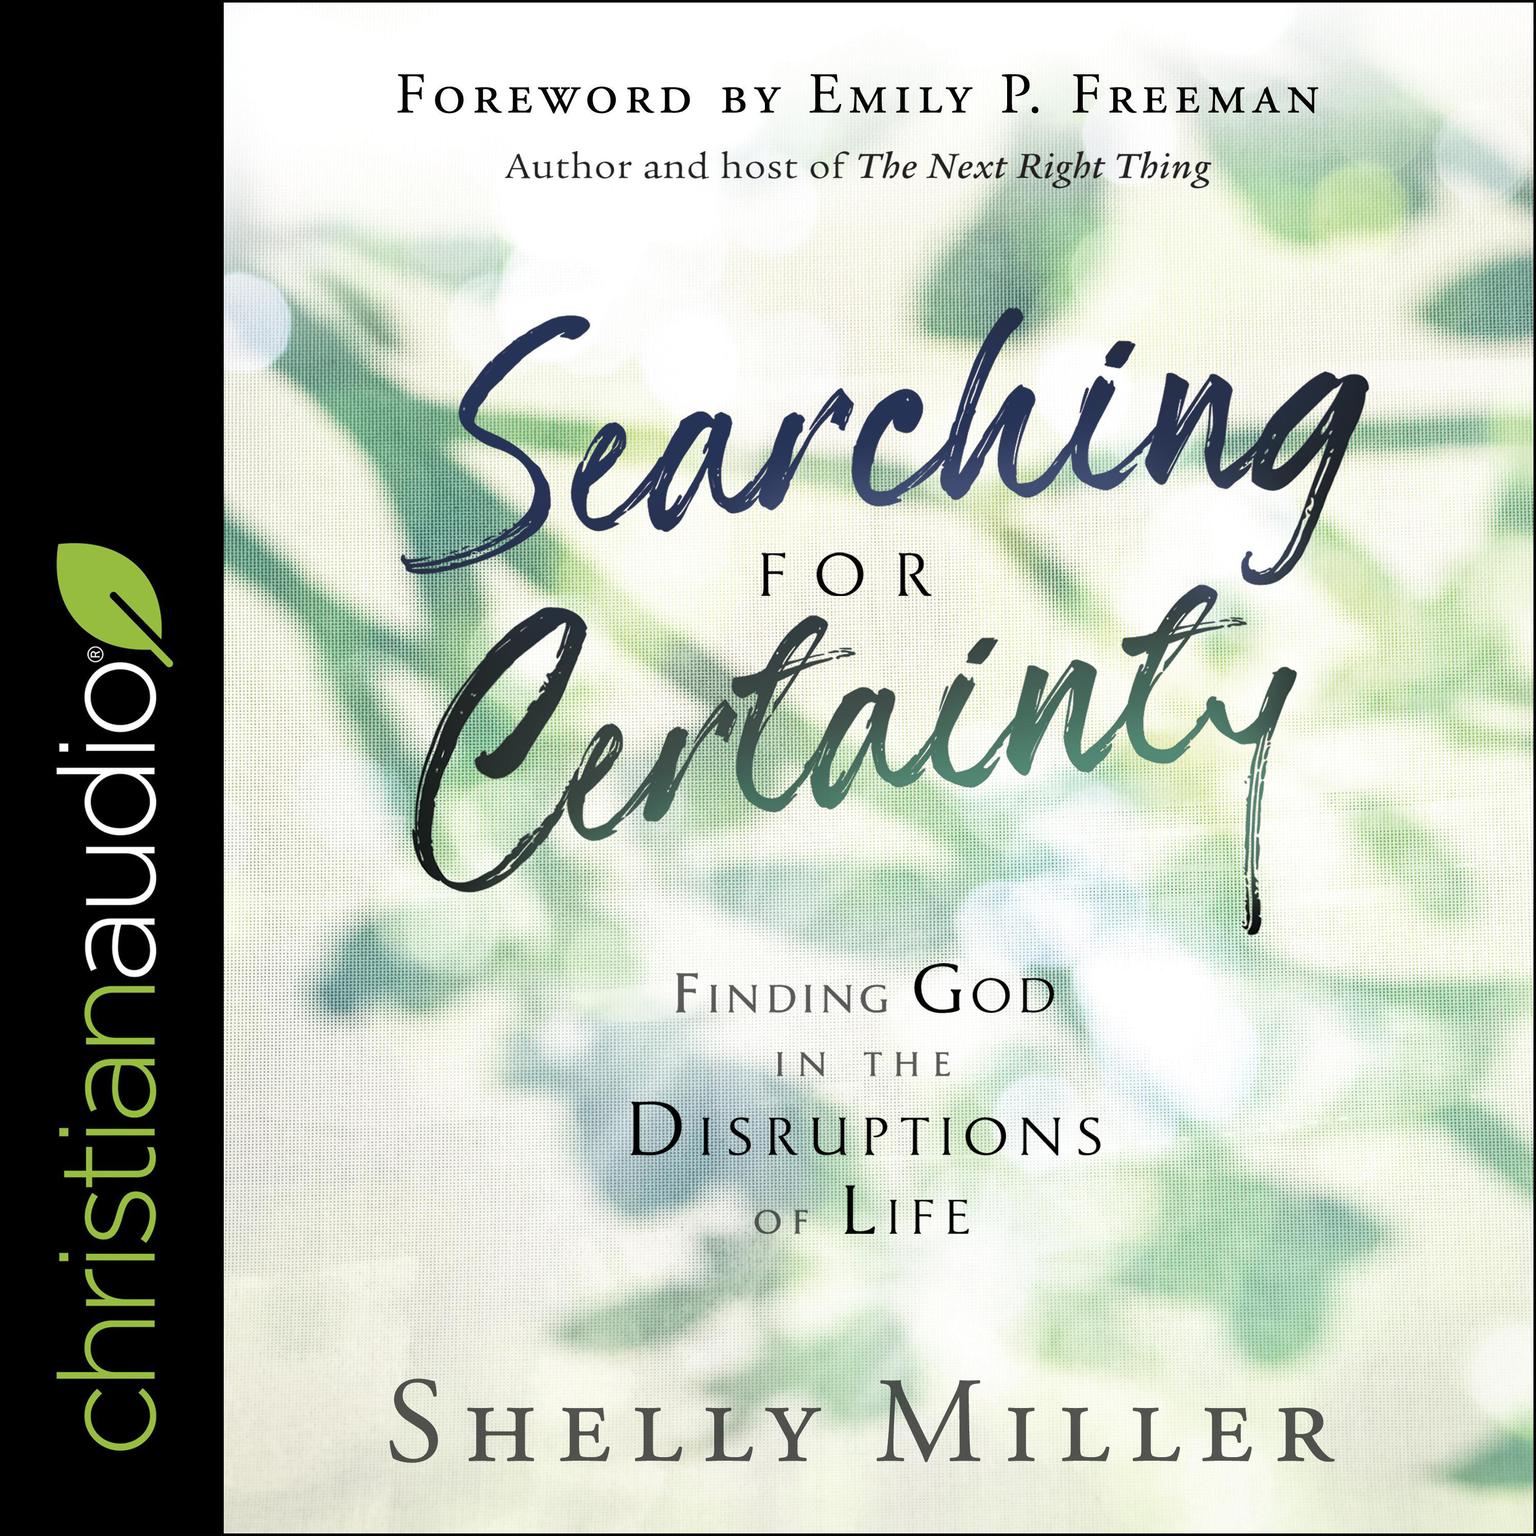 Searching for Certainty: Finding God in the Disruptions of Life Audiobook, by Shelly Miller